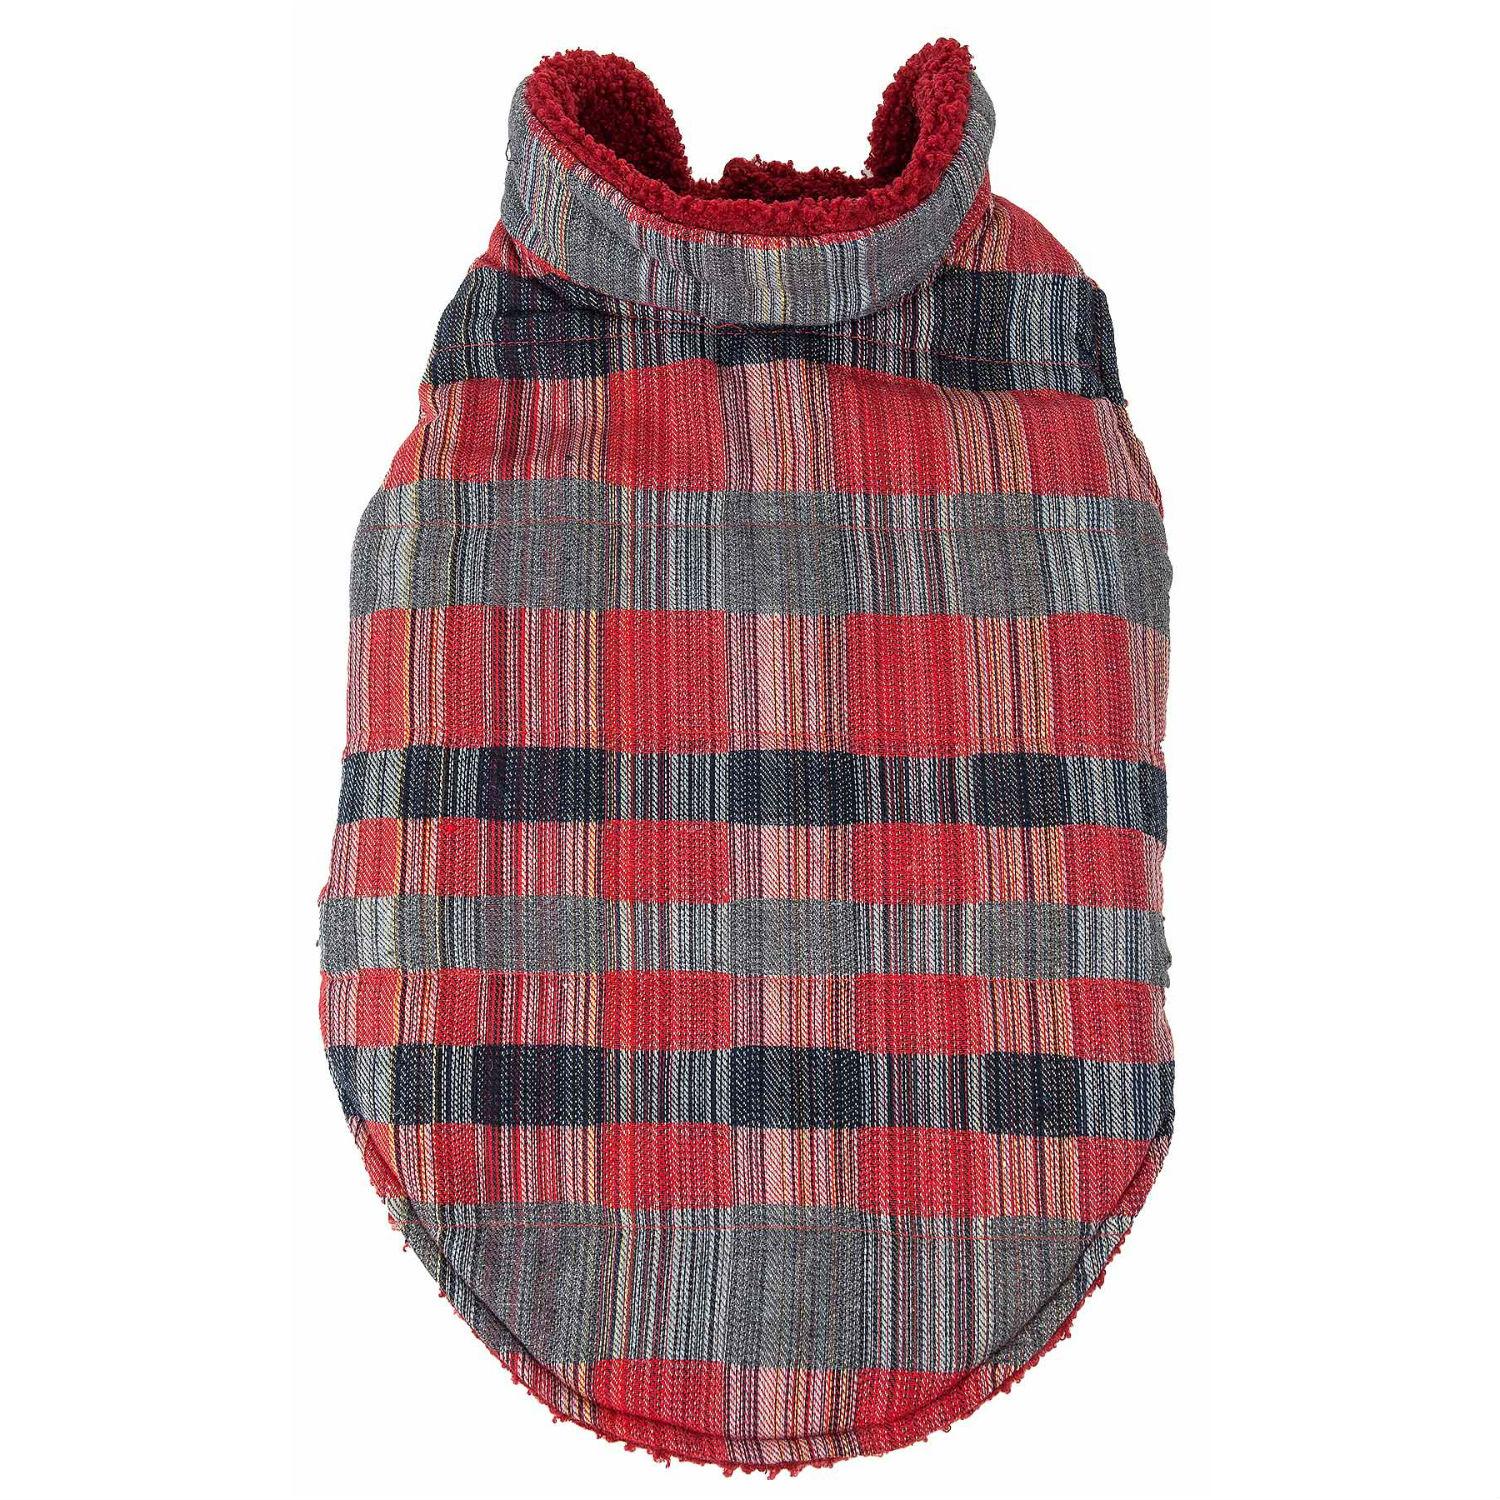 Pet Life Scotty Tartan Classical Plaid Insulated Dog Coat - Red